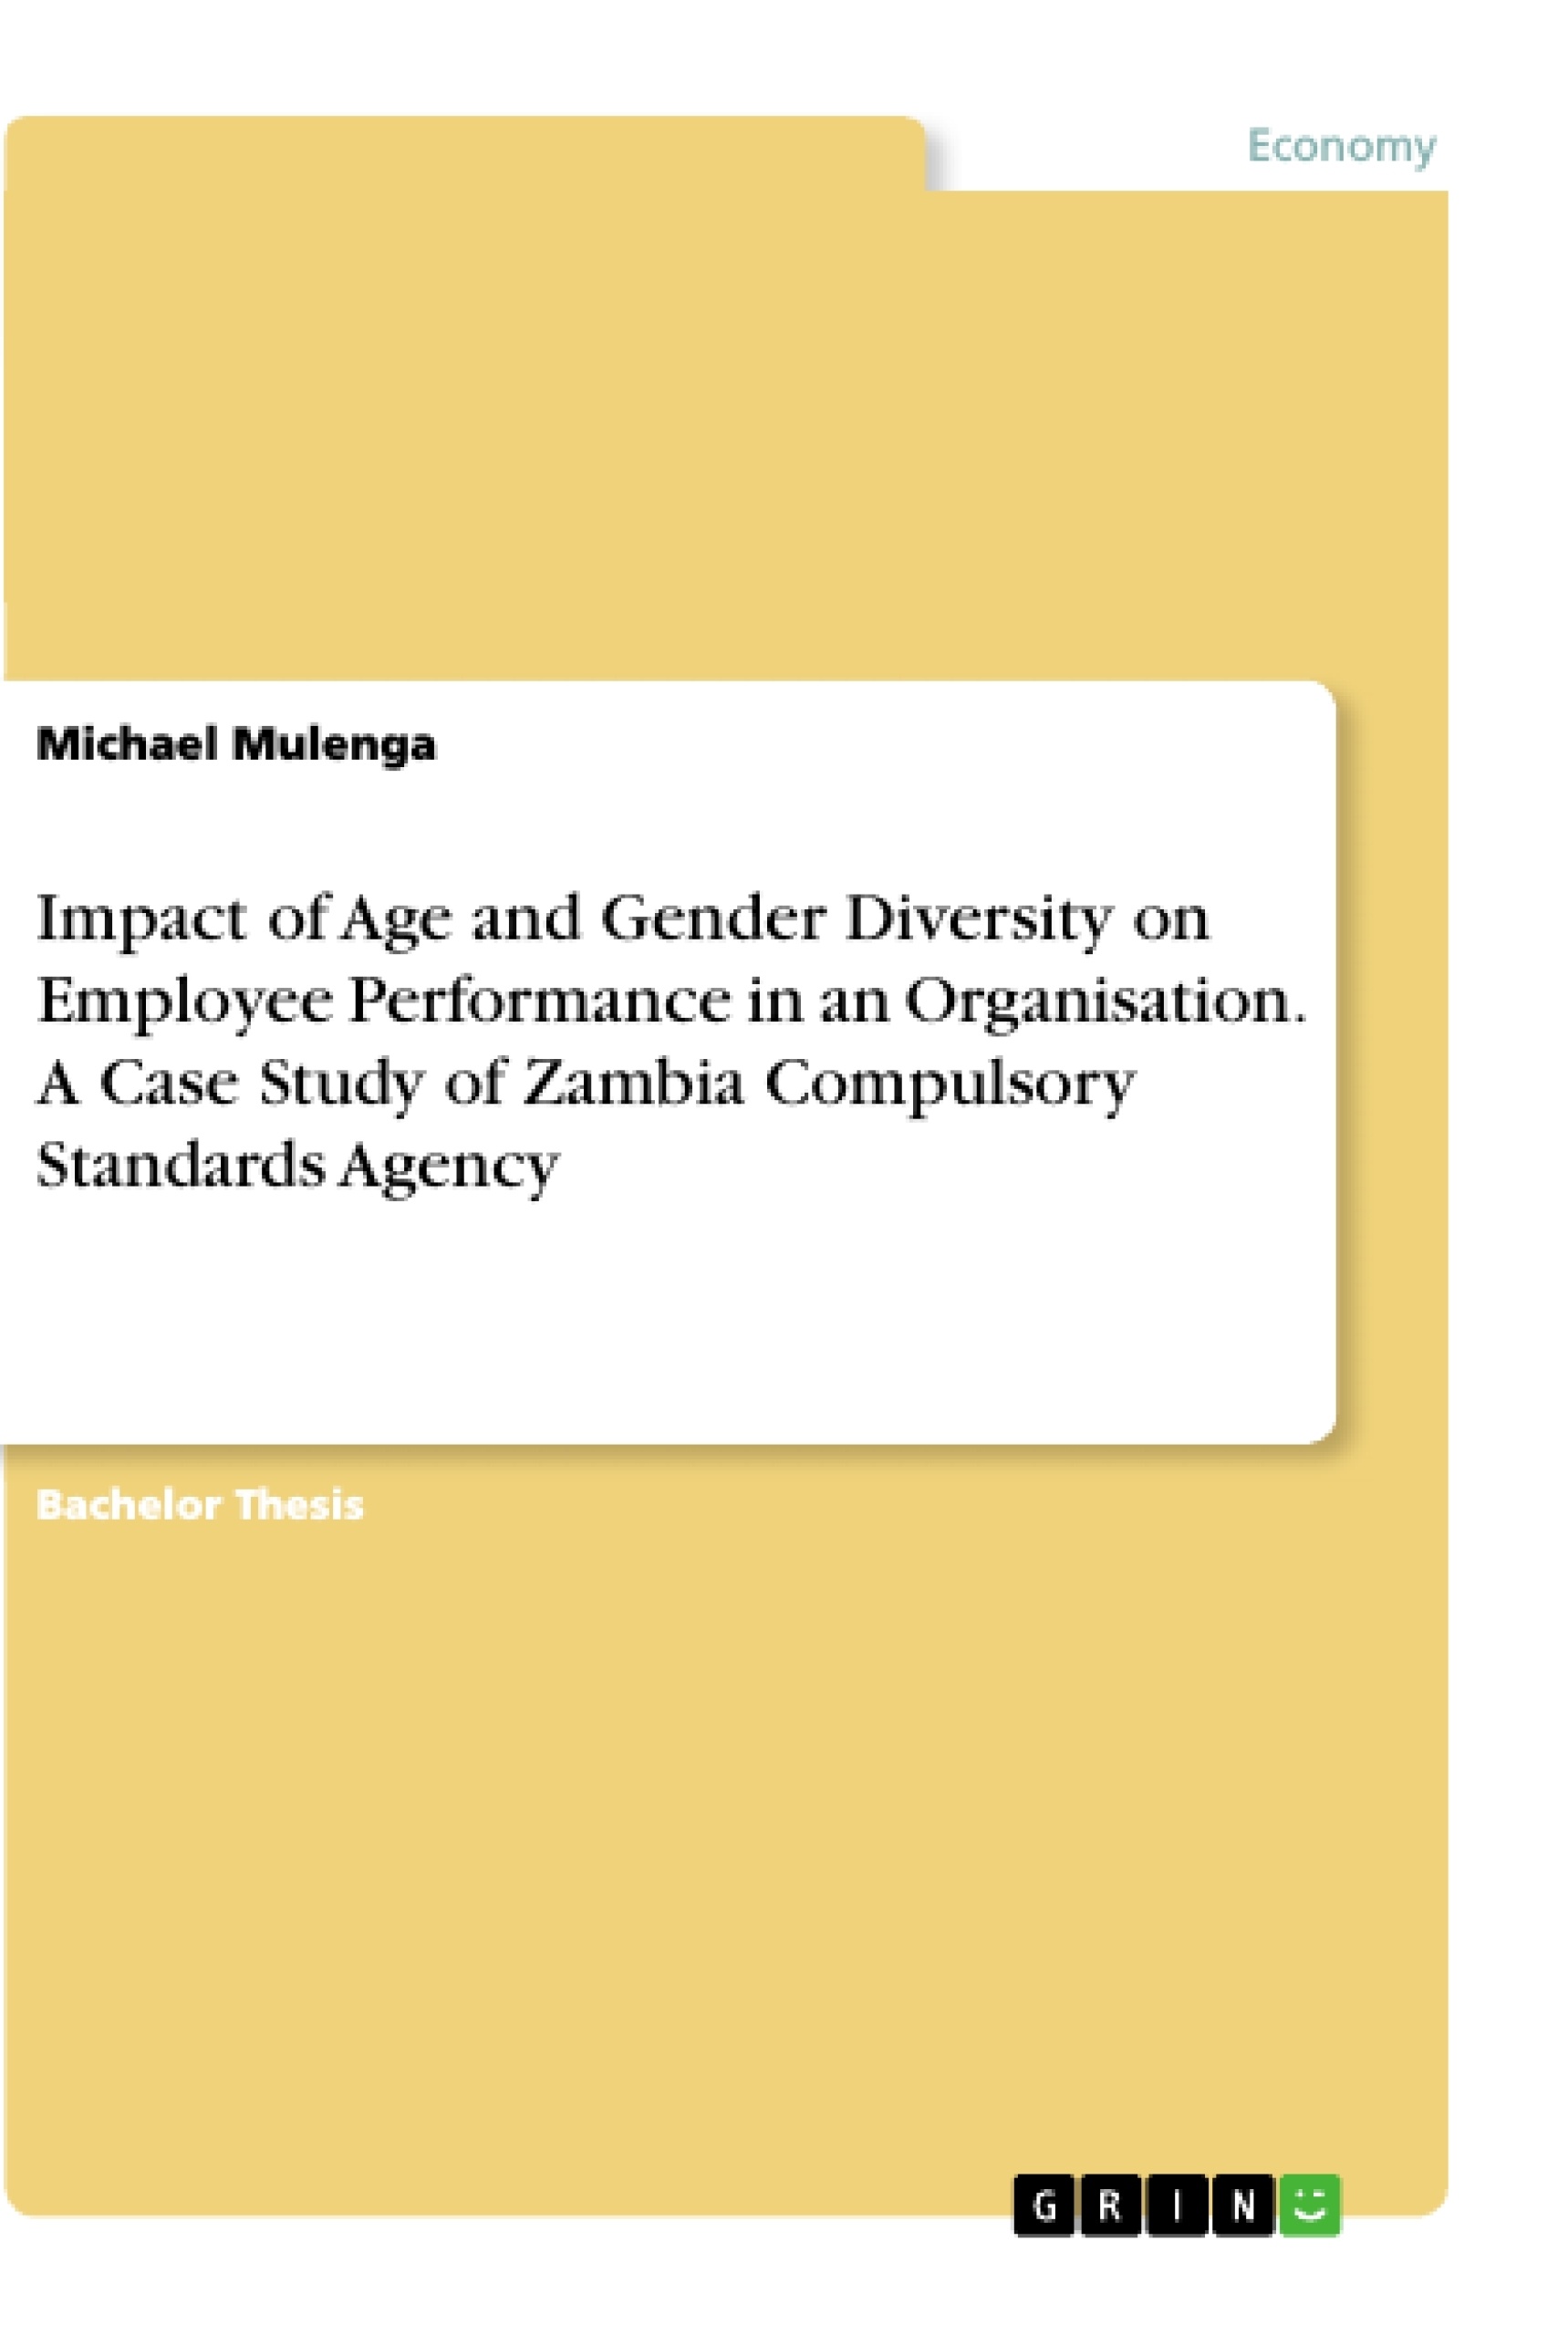 Title: Impact of Age and Gender Diversity on Employee Performance in an Organisation. A Case Study of Zambia Compulsory Standards Agency